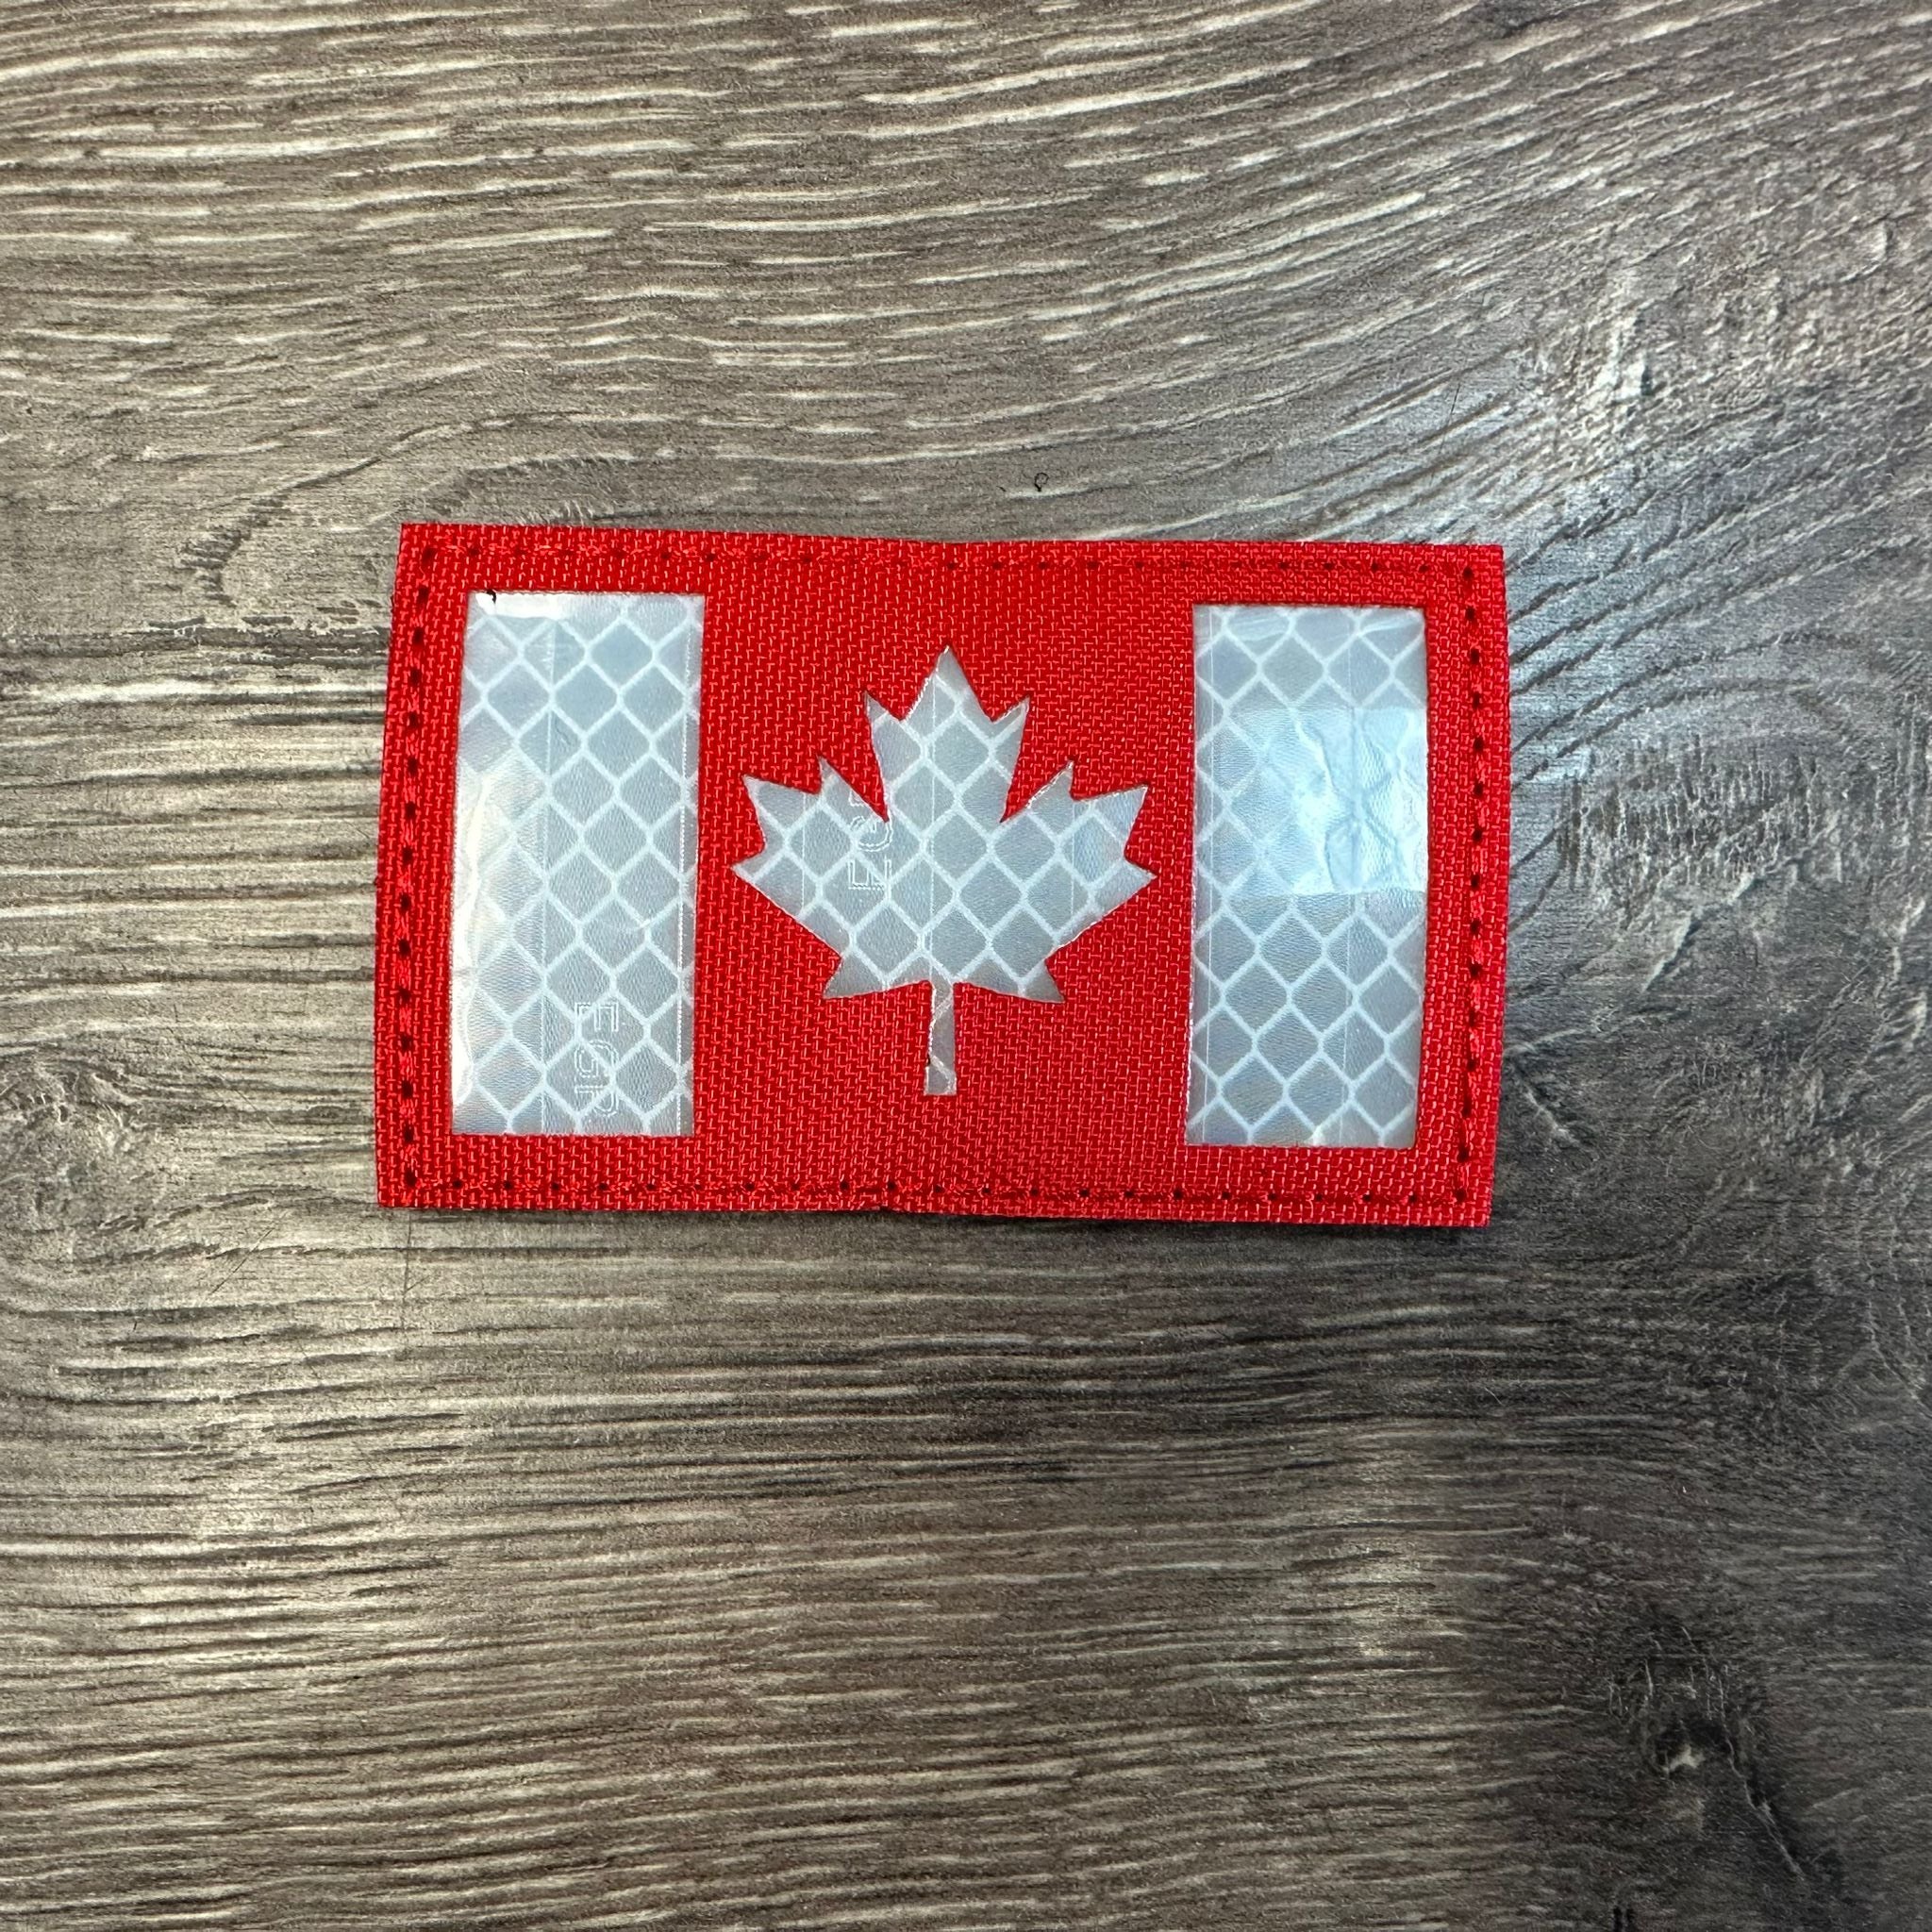 Canadian Flag Velcro Patch - Red & White Reflective